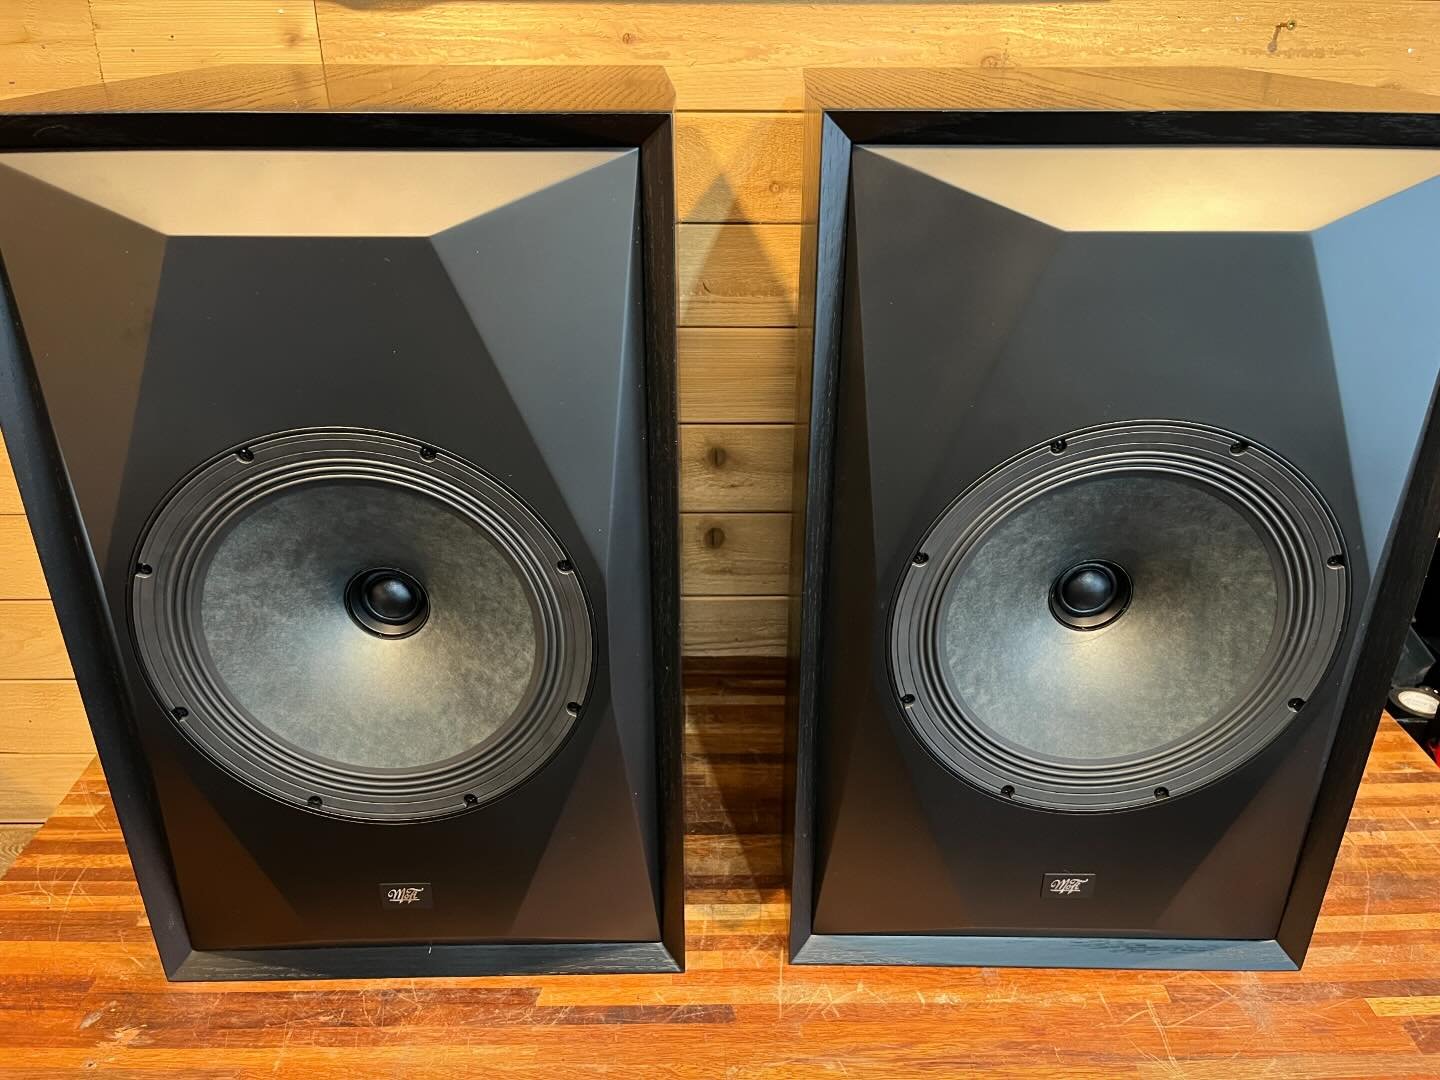 #Mofi SourcePoint 10 speakers.  Grills still sealed, used once. $2299/pair.